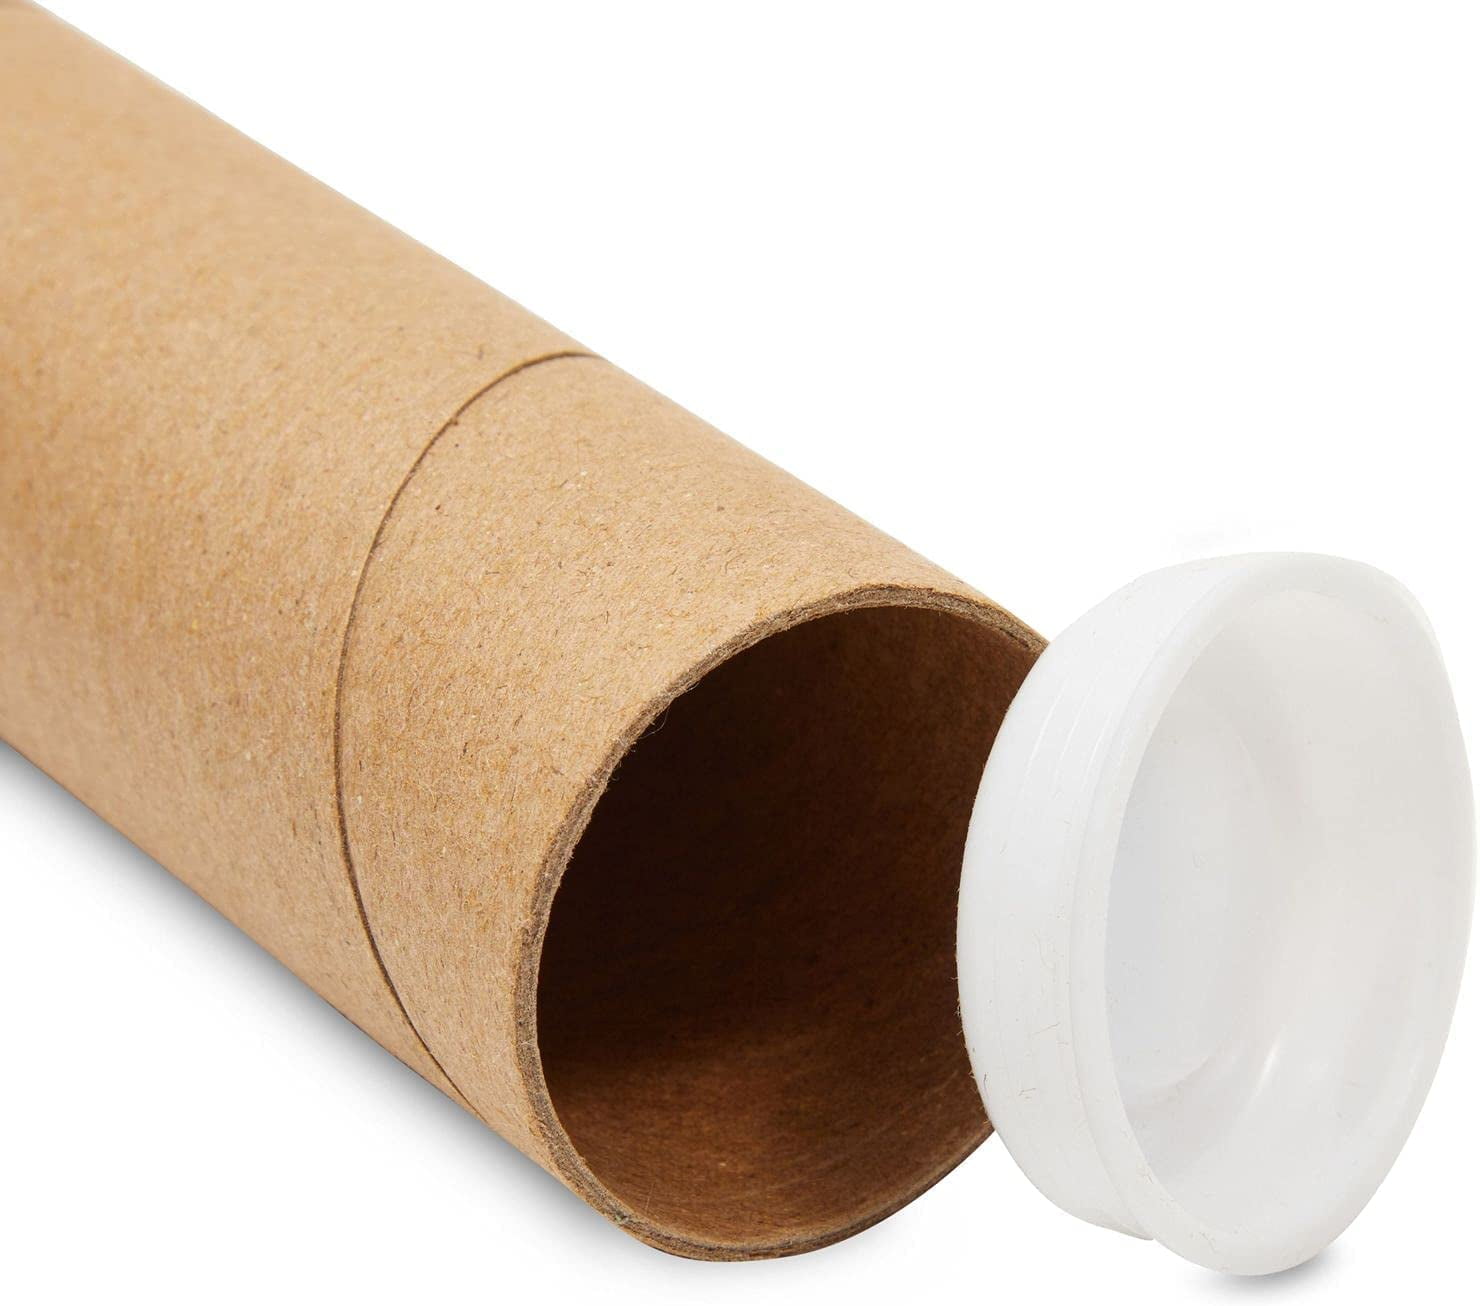 Mailing Tubes with Caps, Telescoping, Kraft, 4 x 24 for $4.21 Online